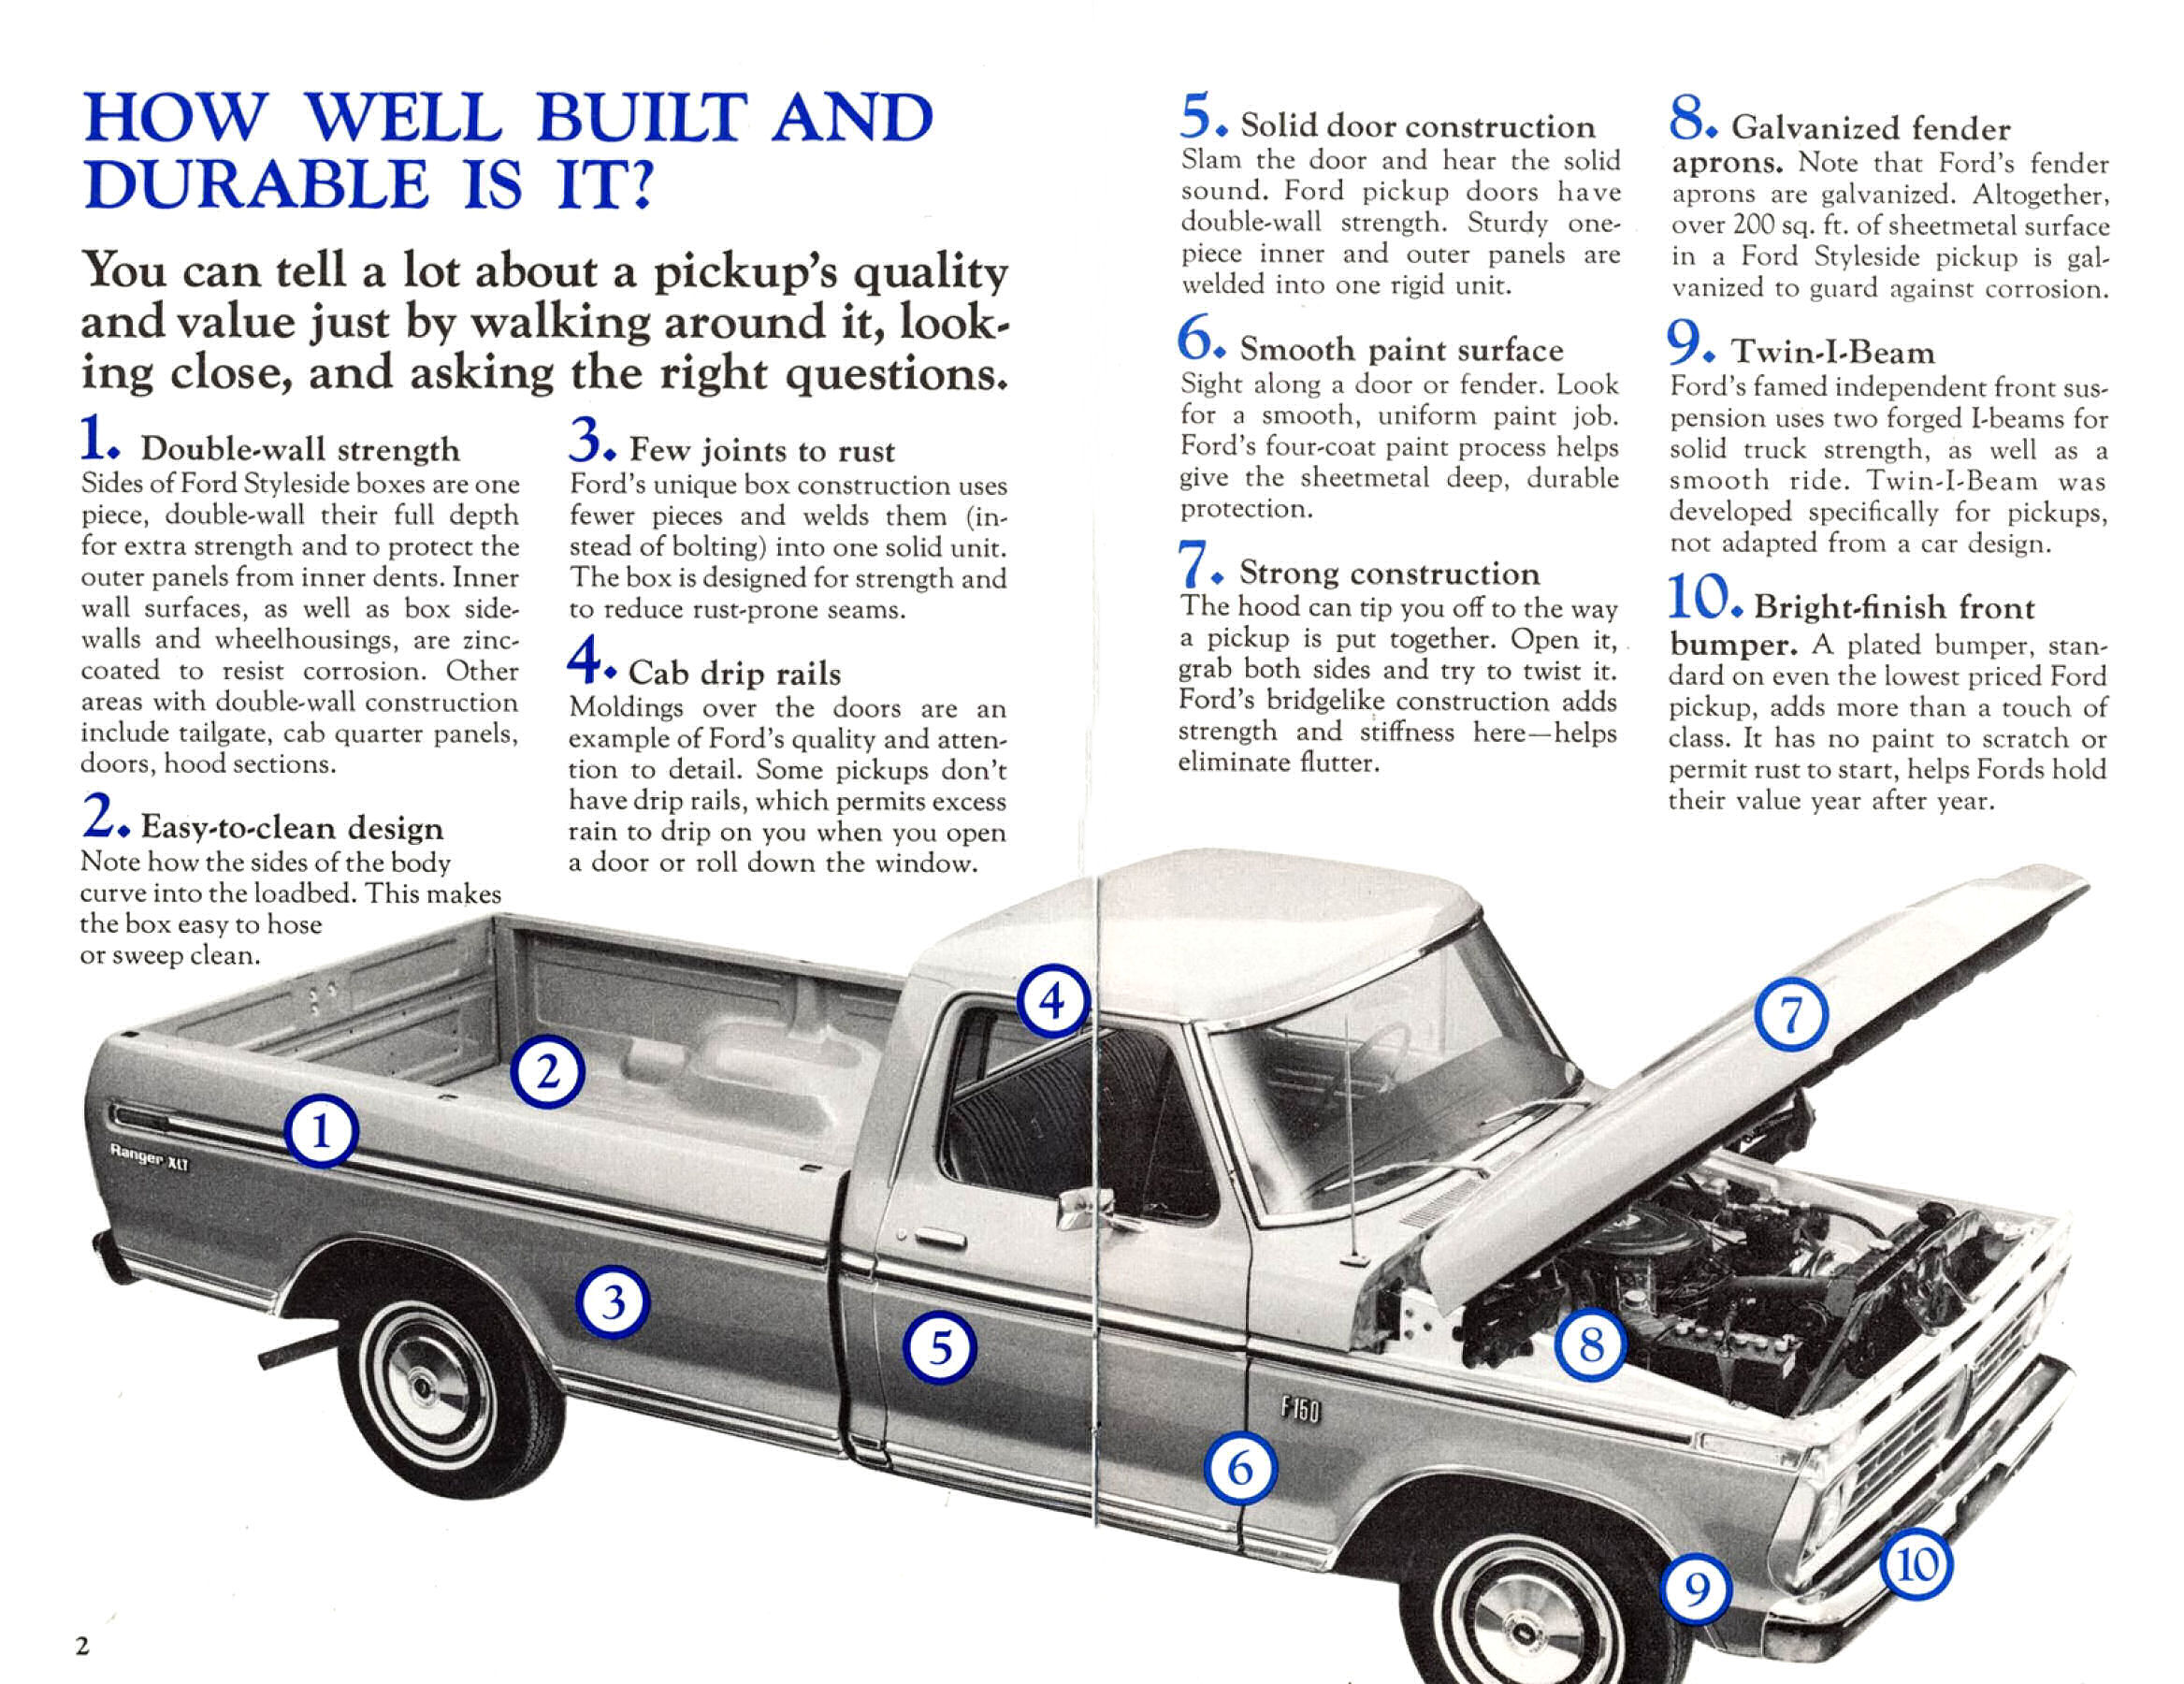 1975 Ford Truck Look-02-03